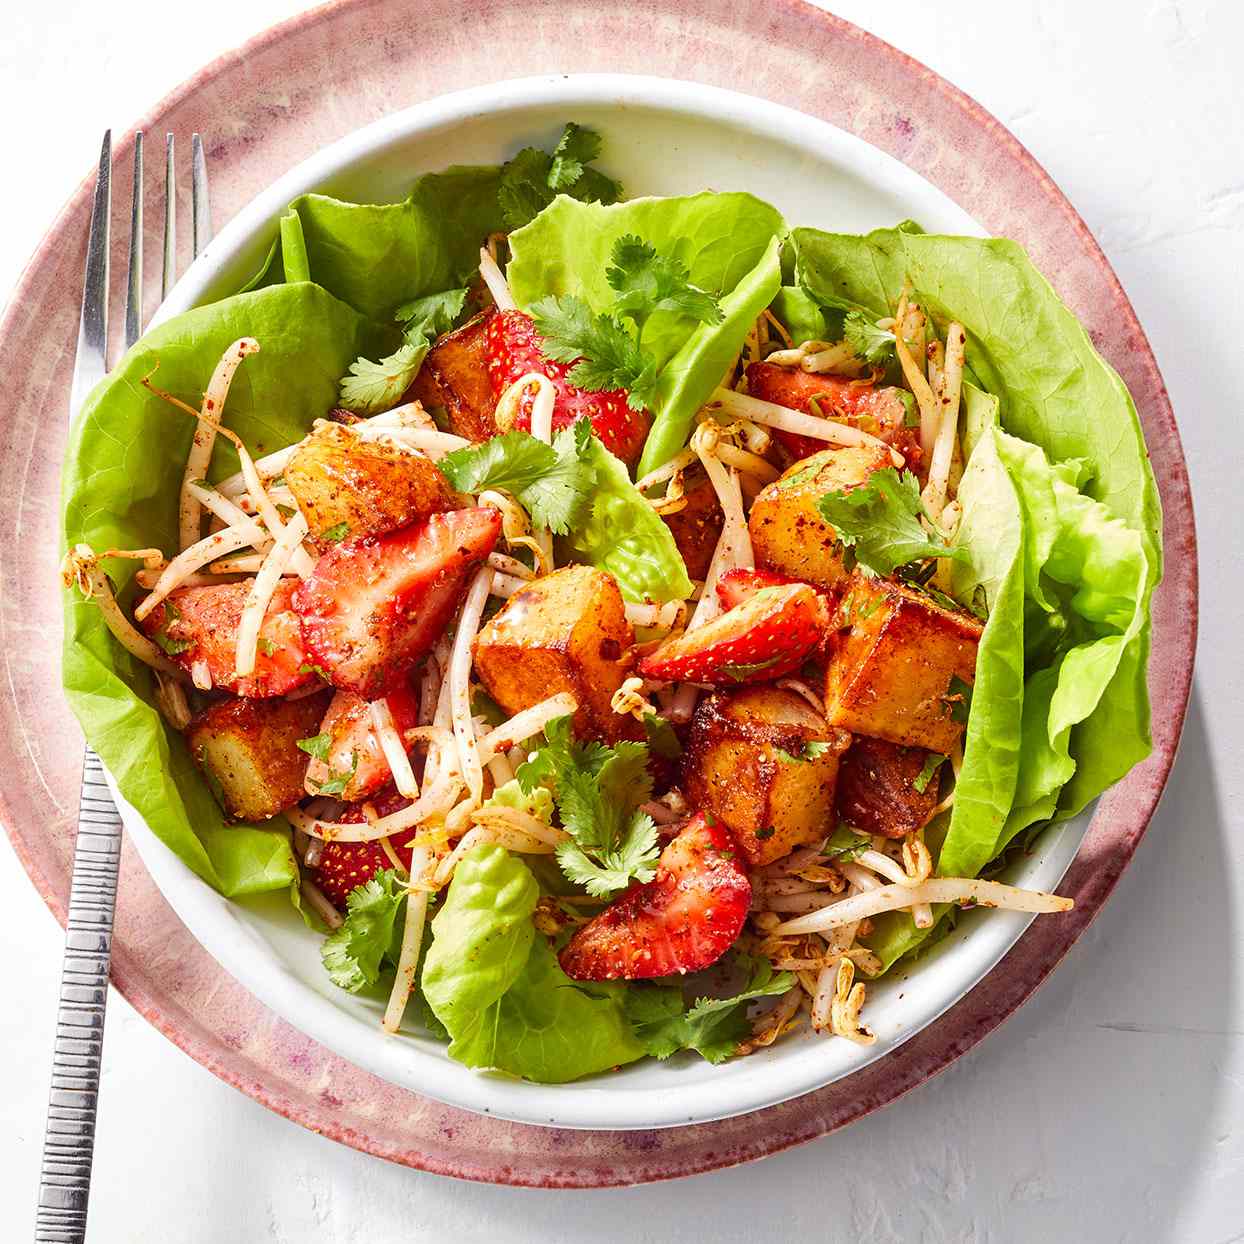 Strawberry & Bean Sprout Salad with Spiced Potatoes 